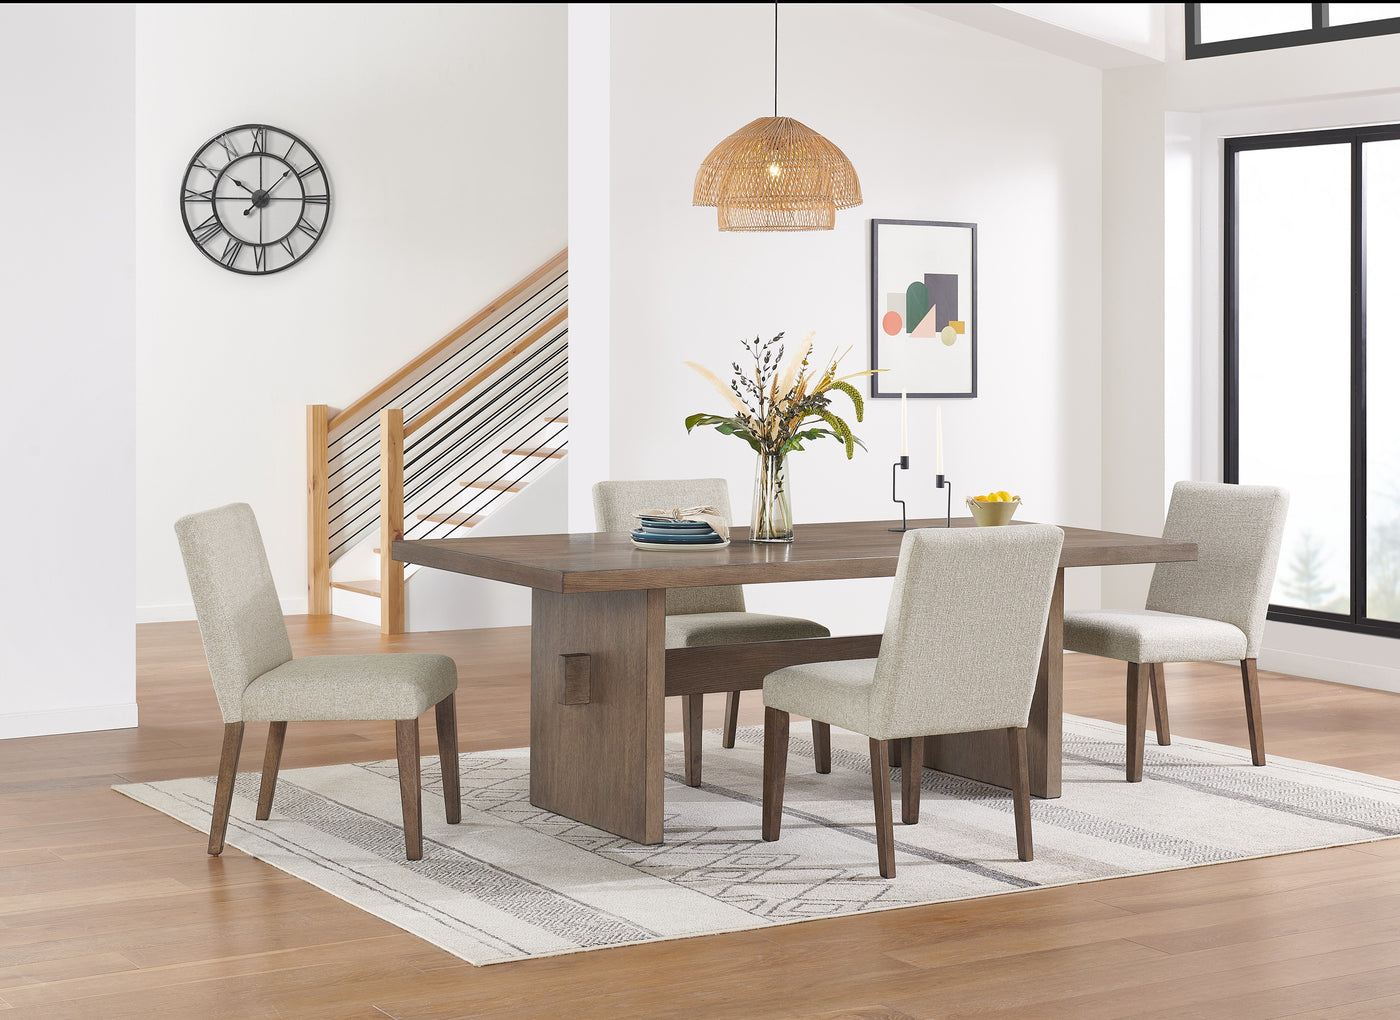 Biscotti Dining Table - Light Brown